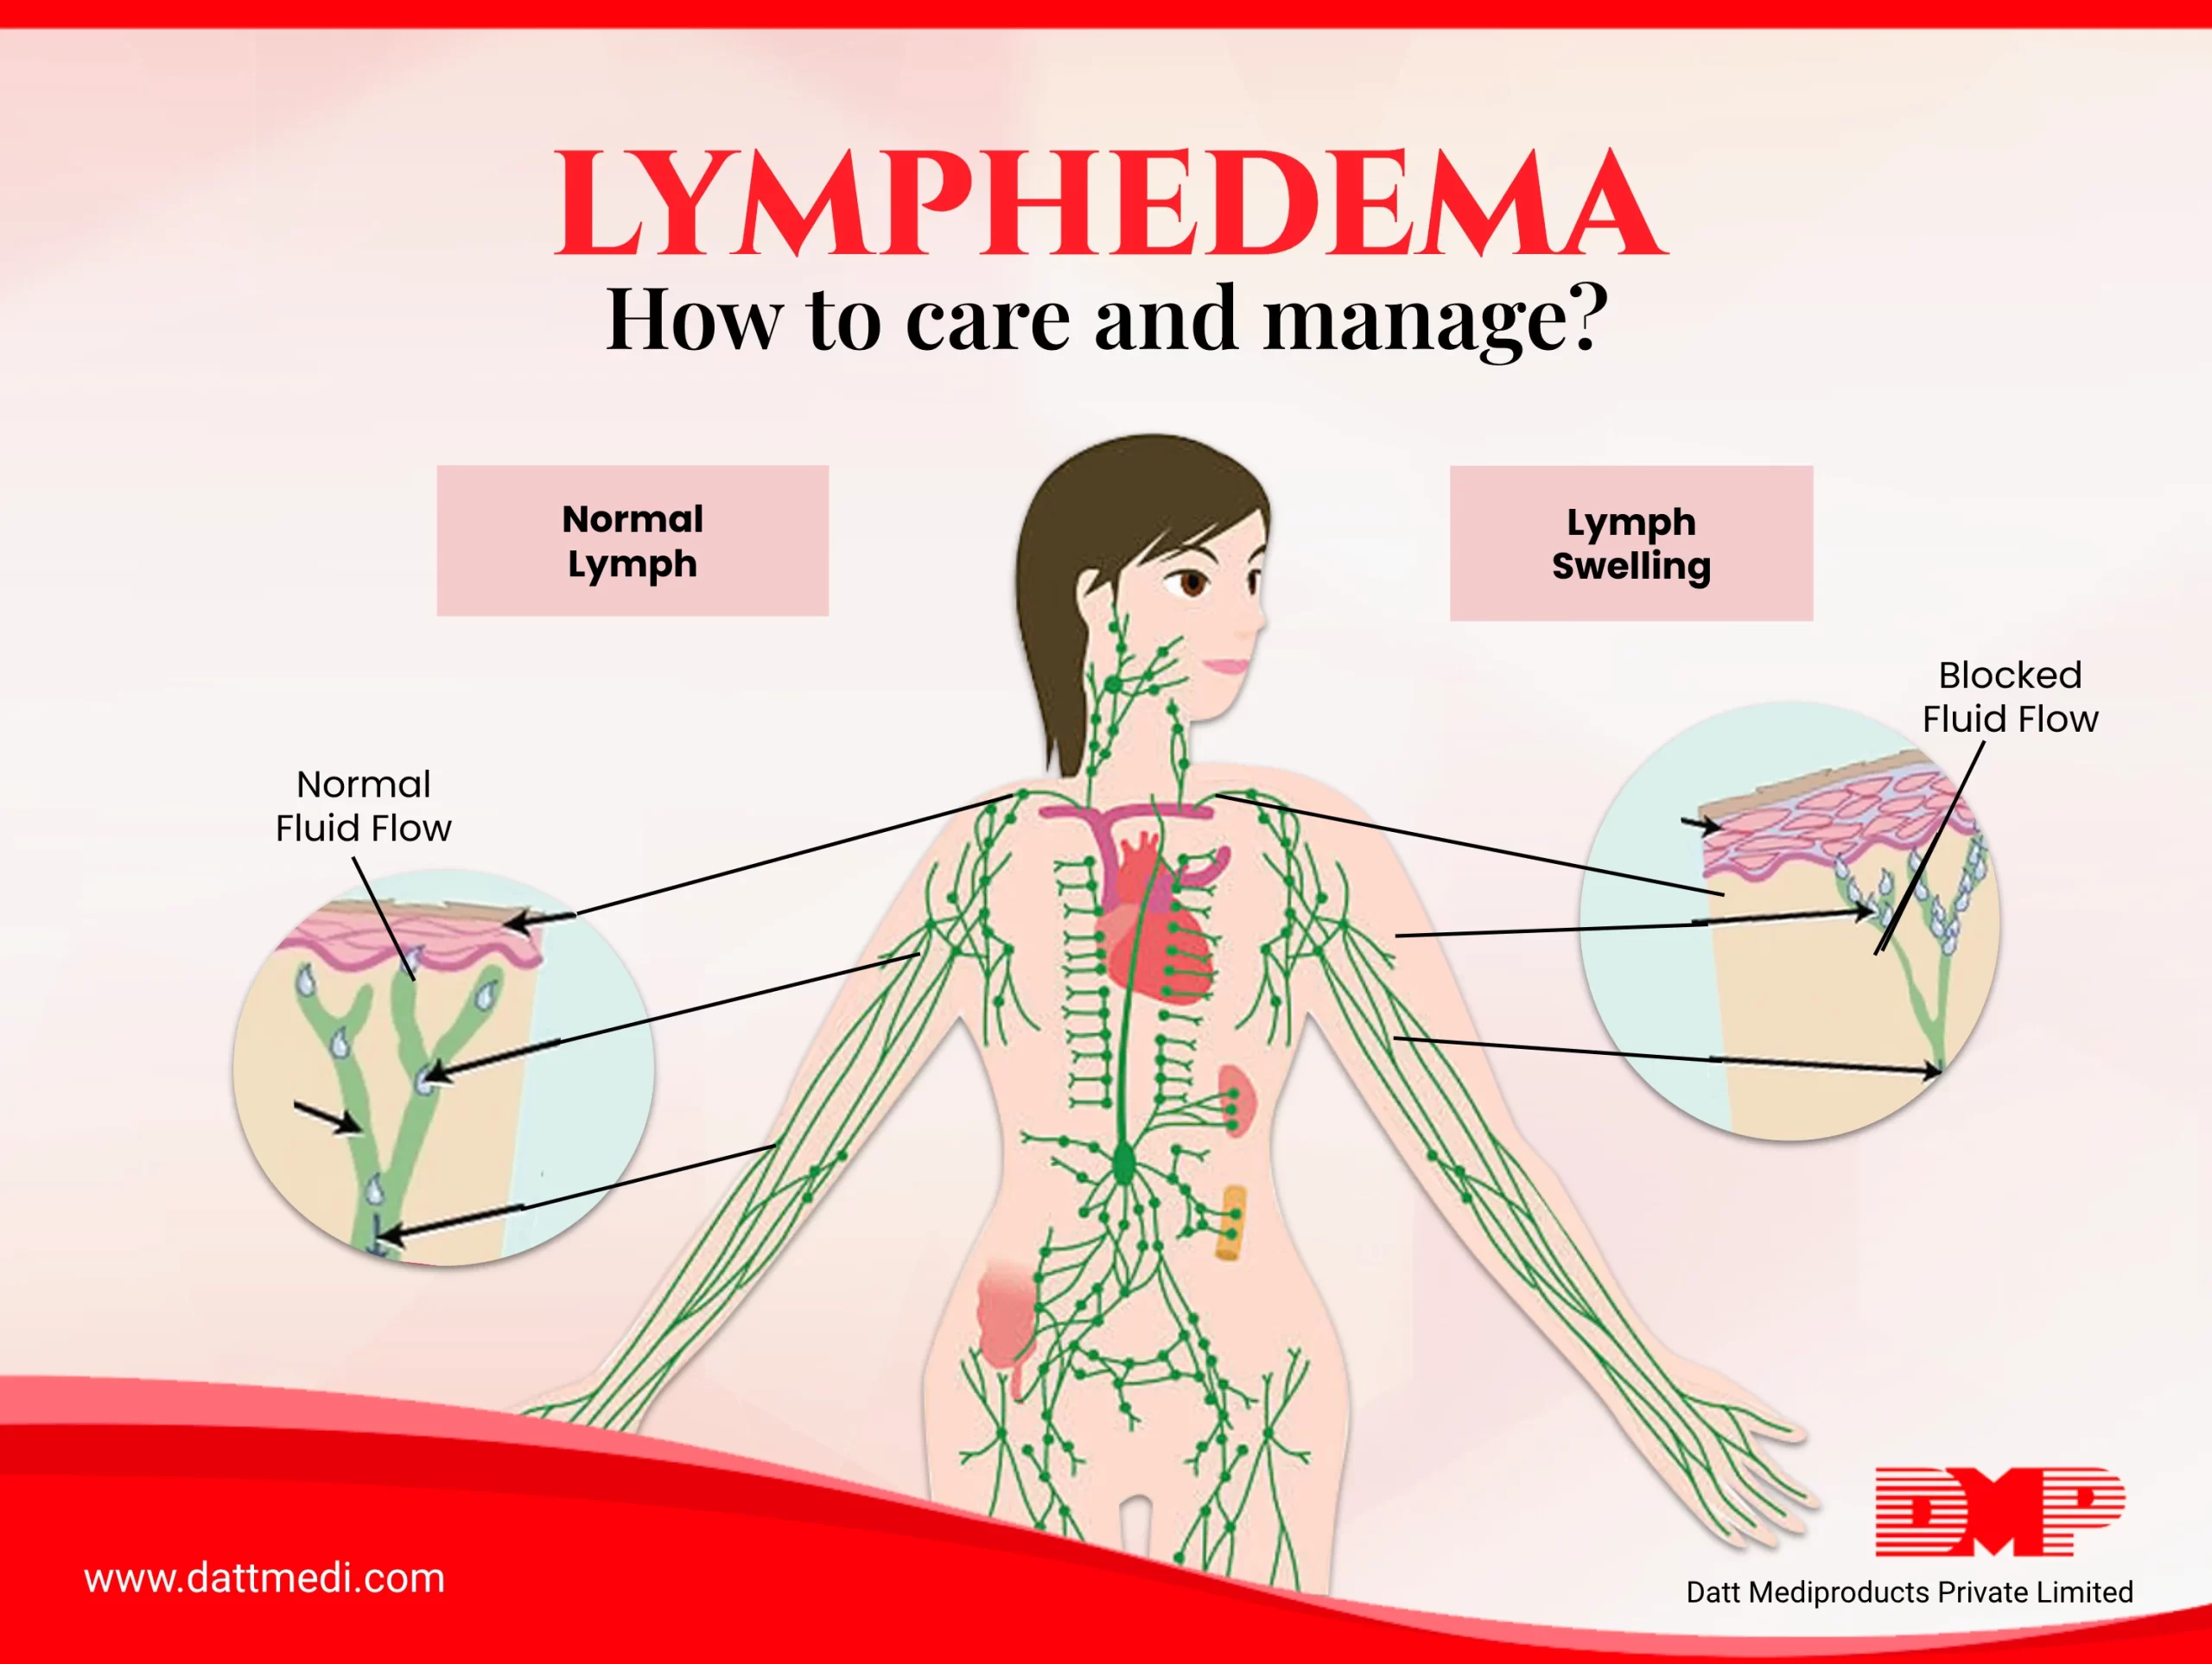 Lymphedema How to care and manage?